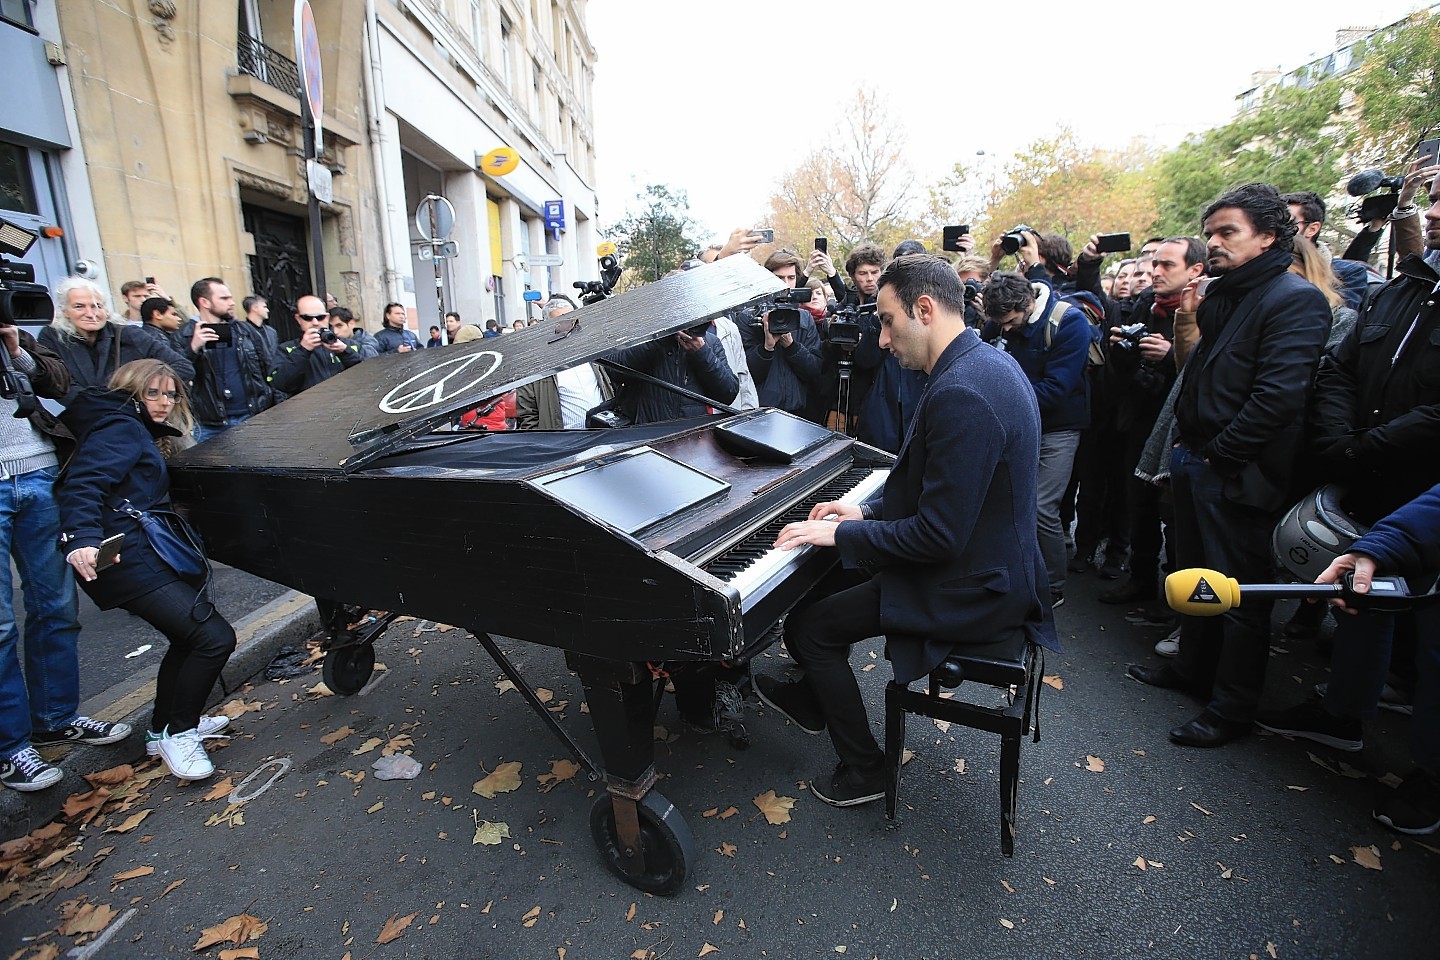 Man brings his portable grand piano and plays John Lennon's Imagine by the Bataclan